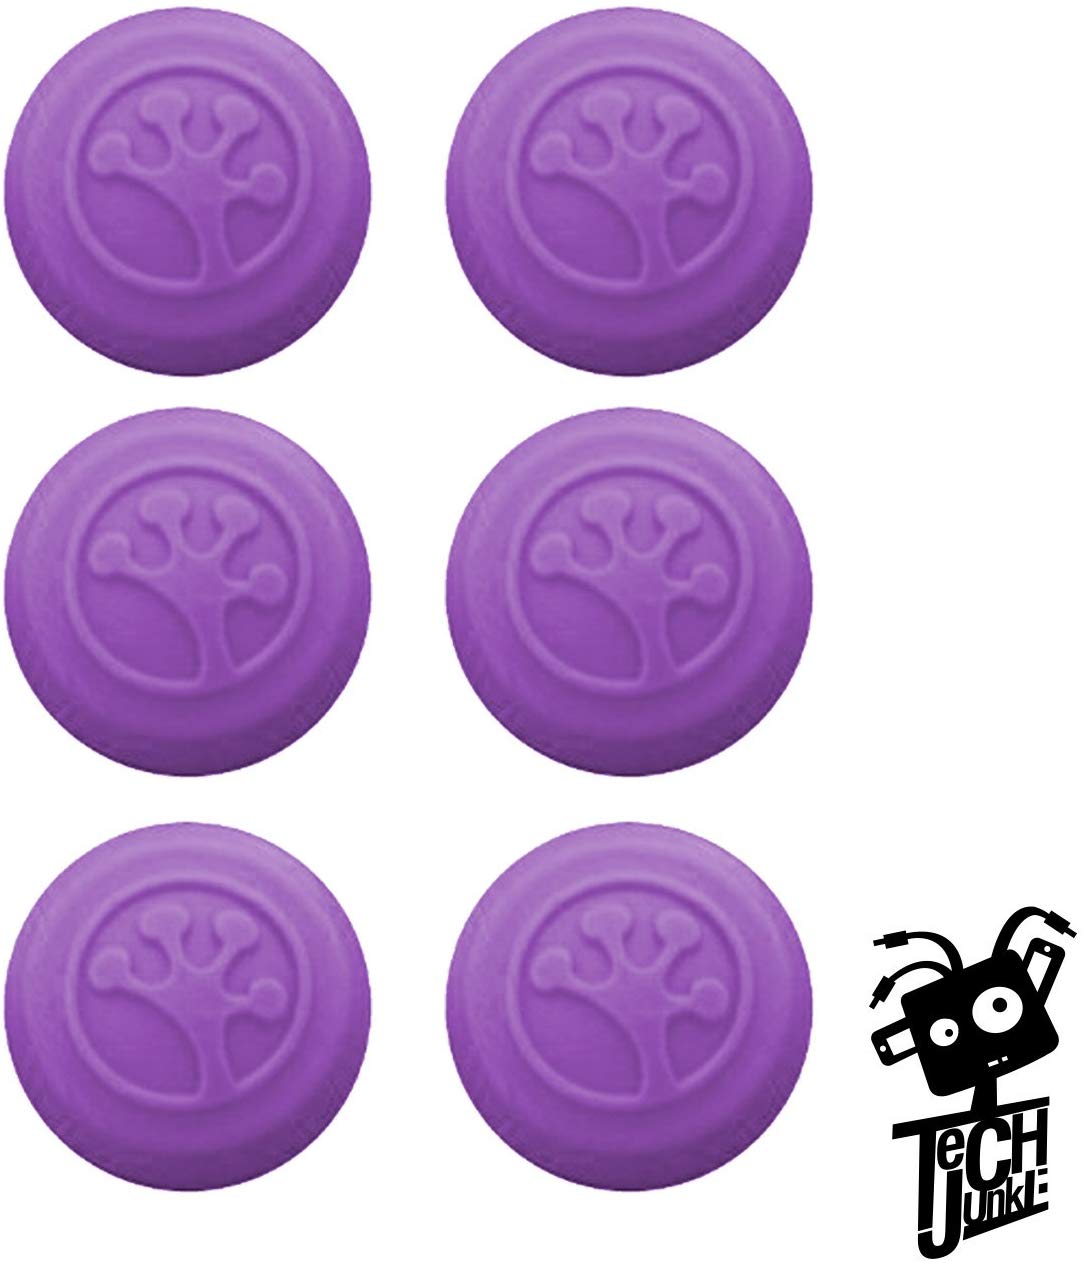 Grip-iT Analog Stick Covers for PS4, PS3, Xbox One, & Xbox 360 (6-Pack Purple)